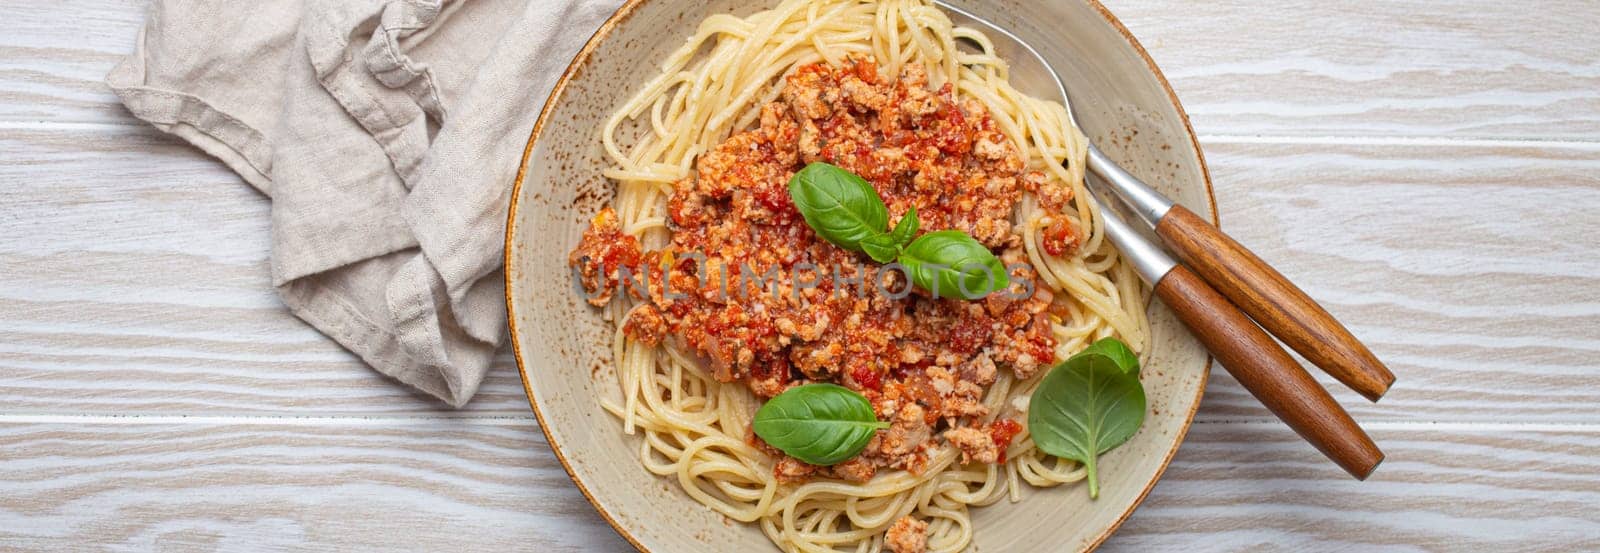 Plate of spaghetti bolognese with basil on wooden table by its_al_dente